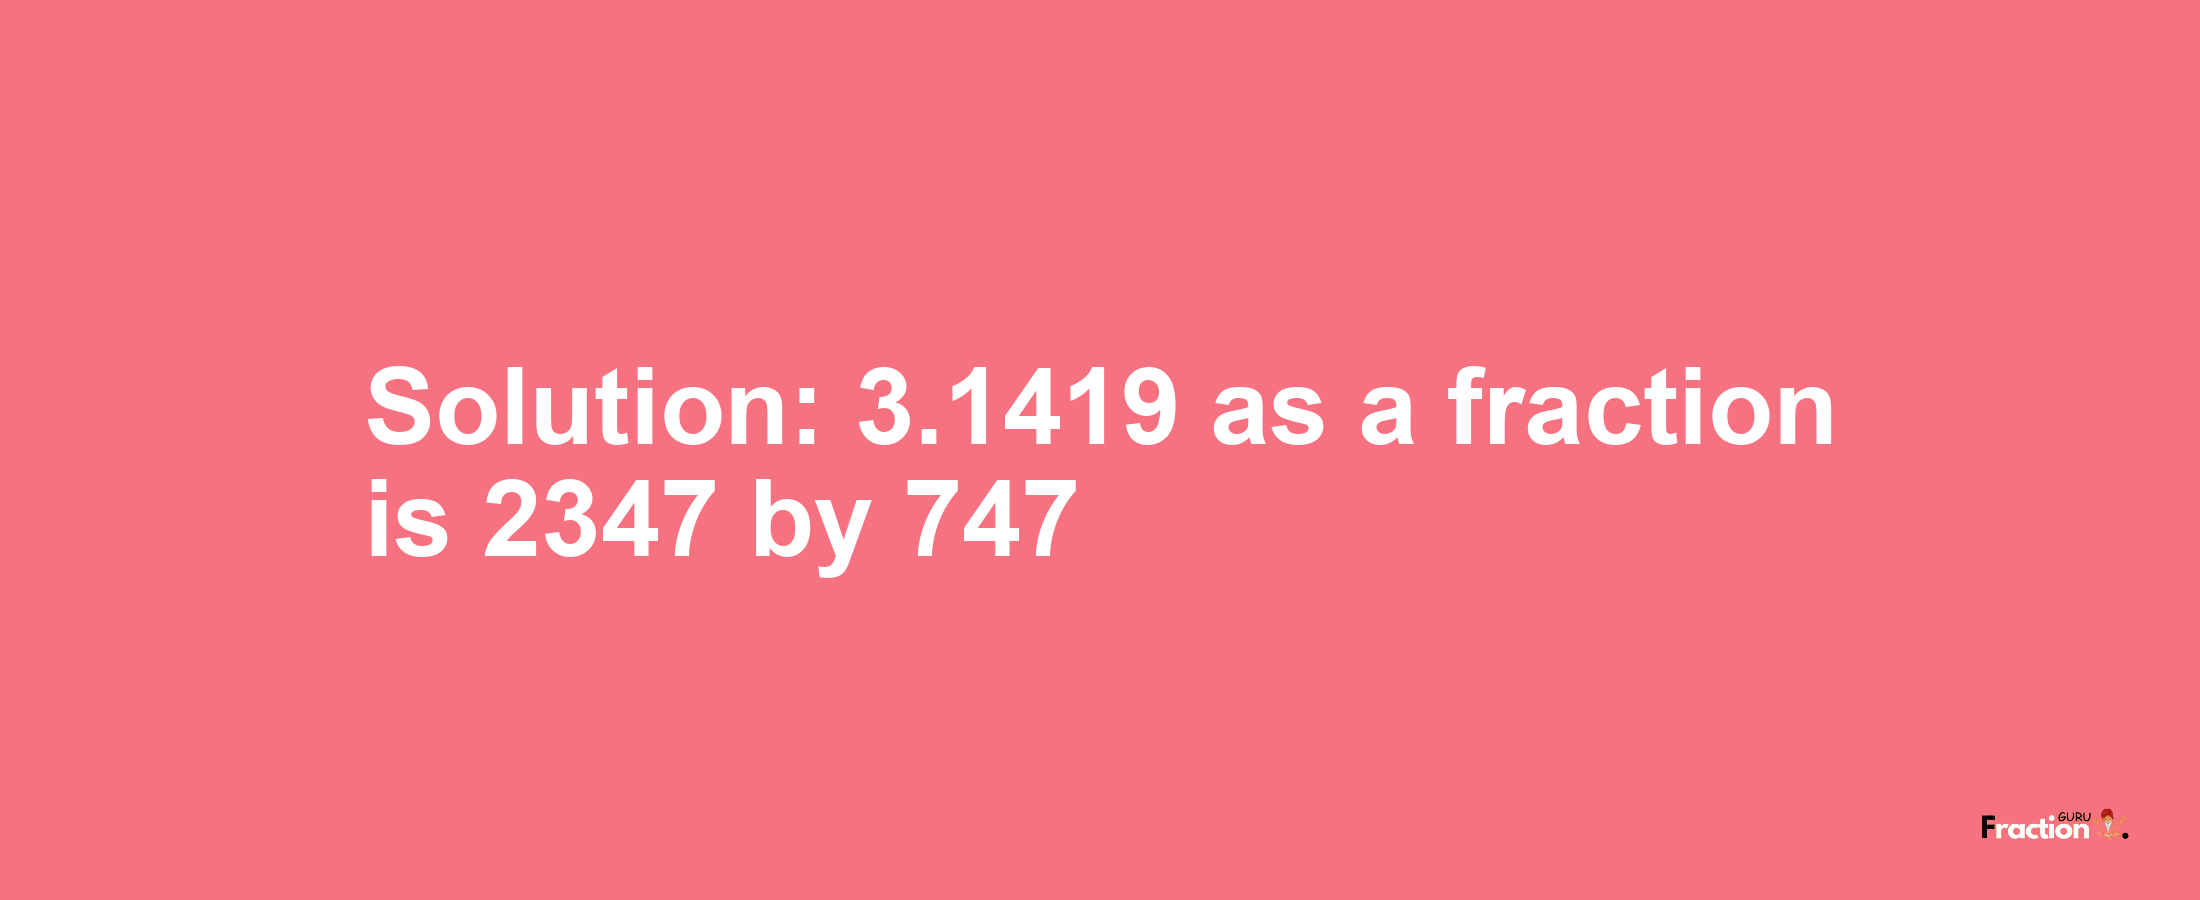 Solution:3.1419 as a fraction is 2347/747